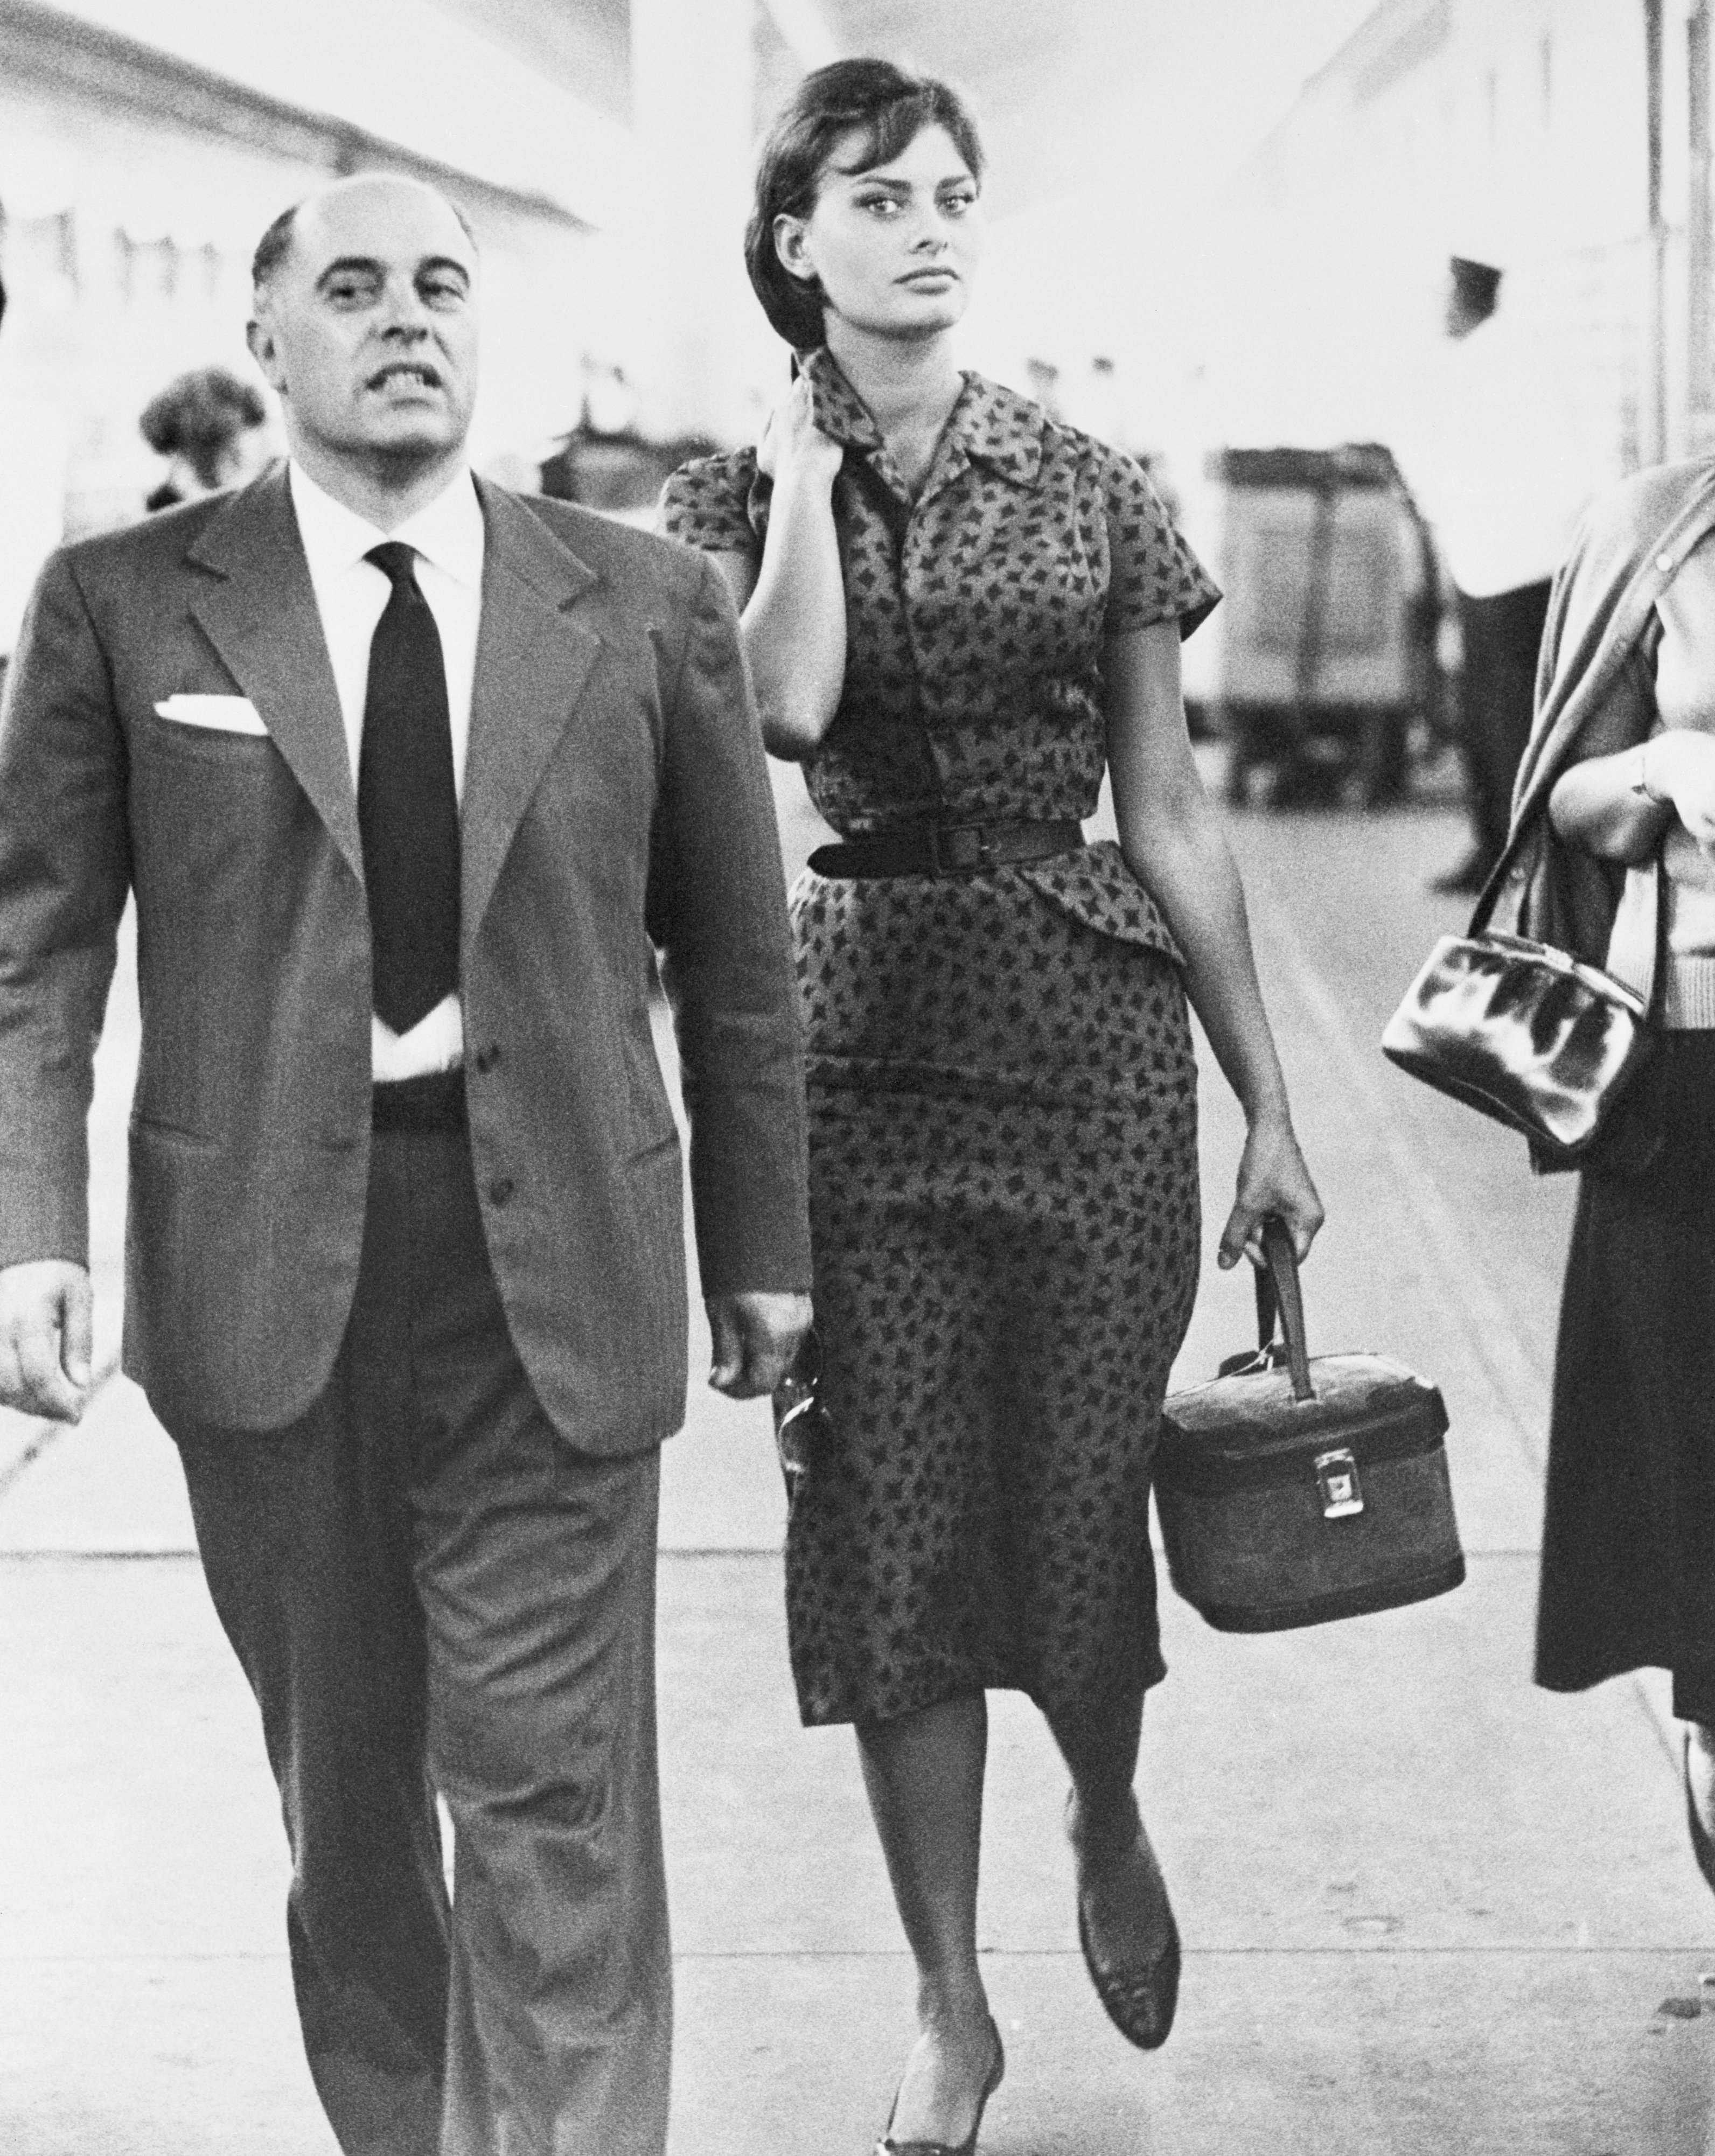 Carlo Ponti Sr. and Sophia Loren at the Los Angeles Union Terminal Station on  September 27, 1957. | Source: Bettmann/Getty Images